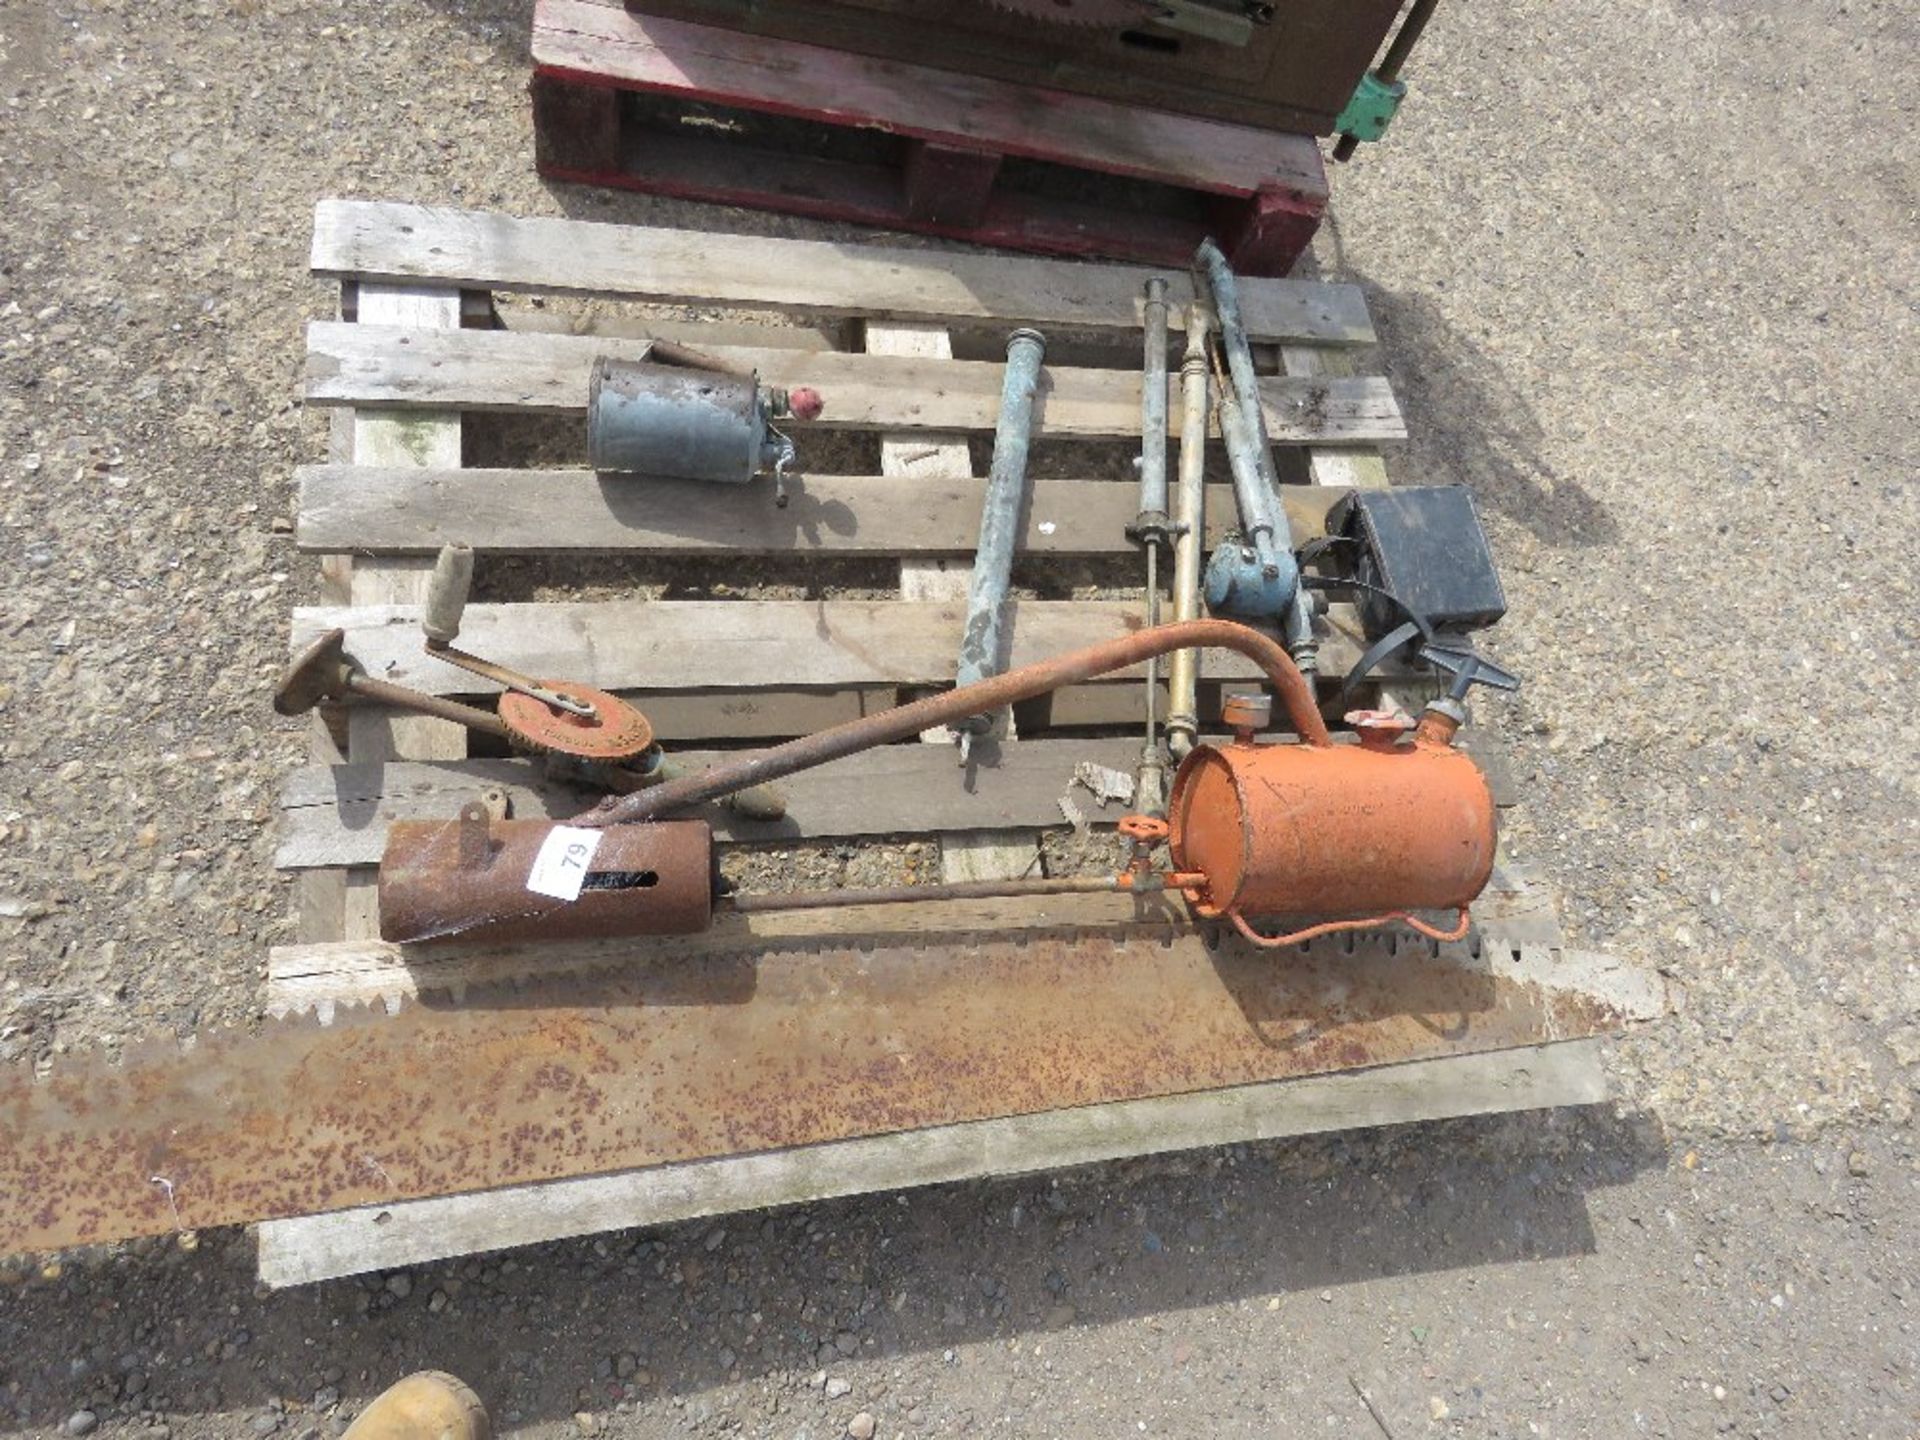 FLAME GUN, OLD SAW AND ITEMS OF INTEREST.